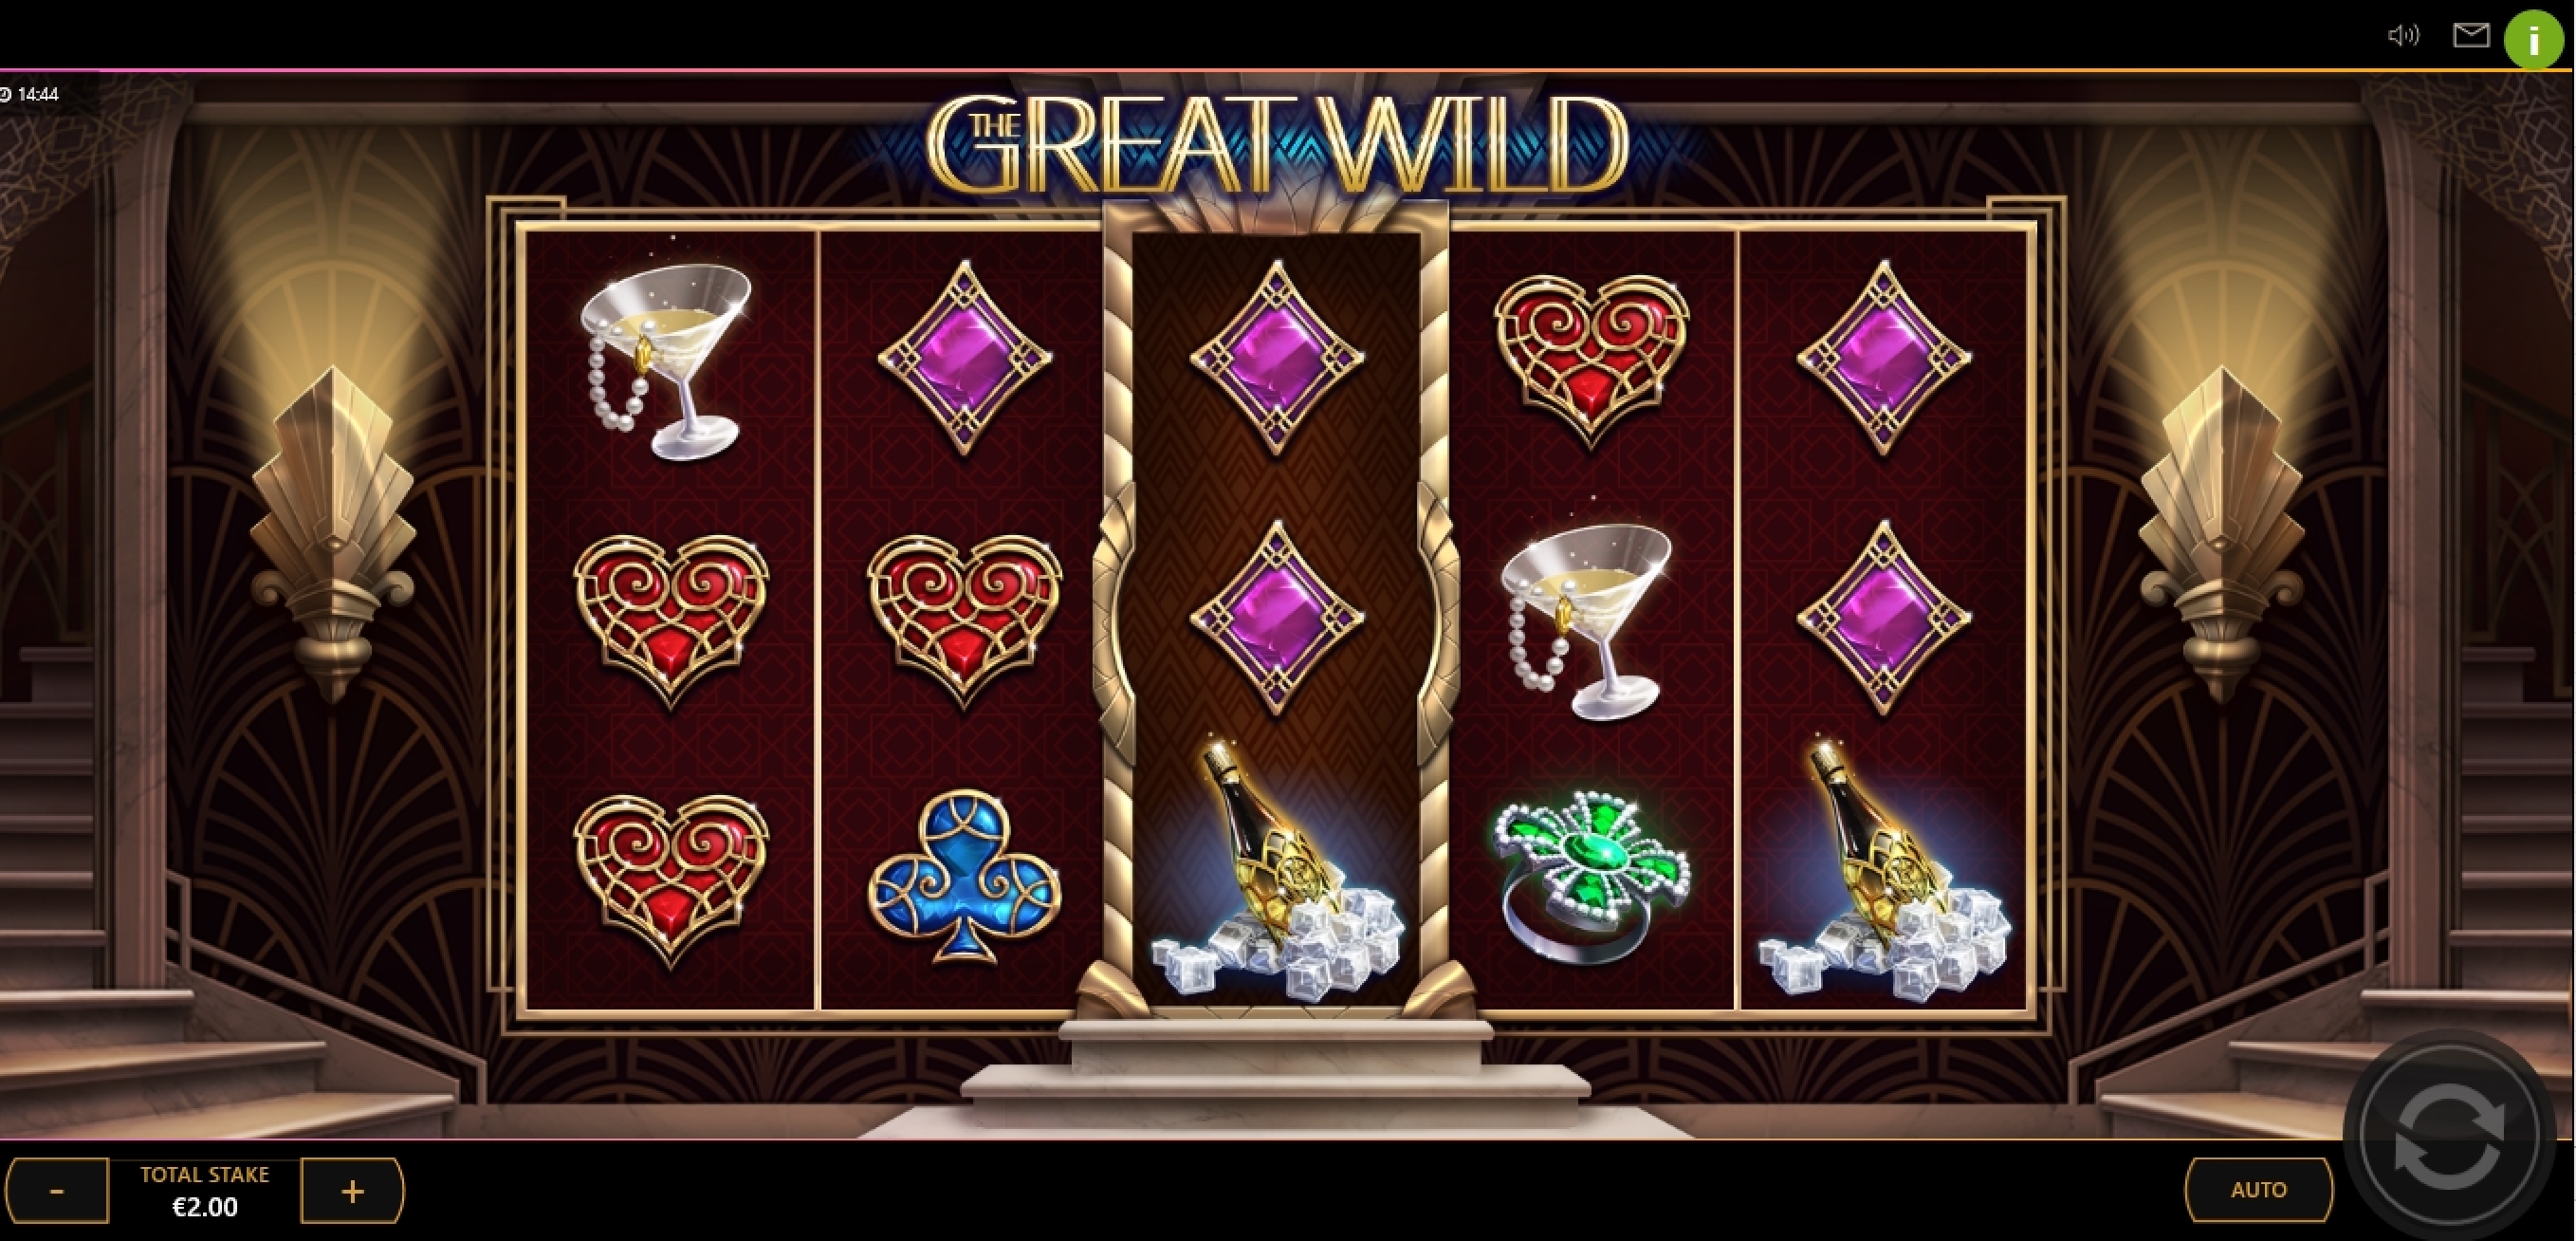 Reels in The Great Wild Slot Game by Cayetano Gaming